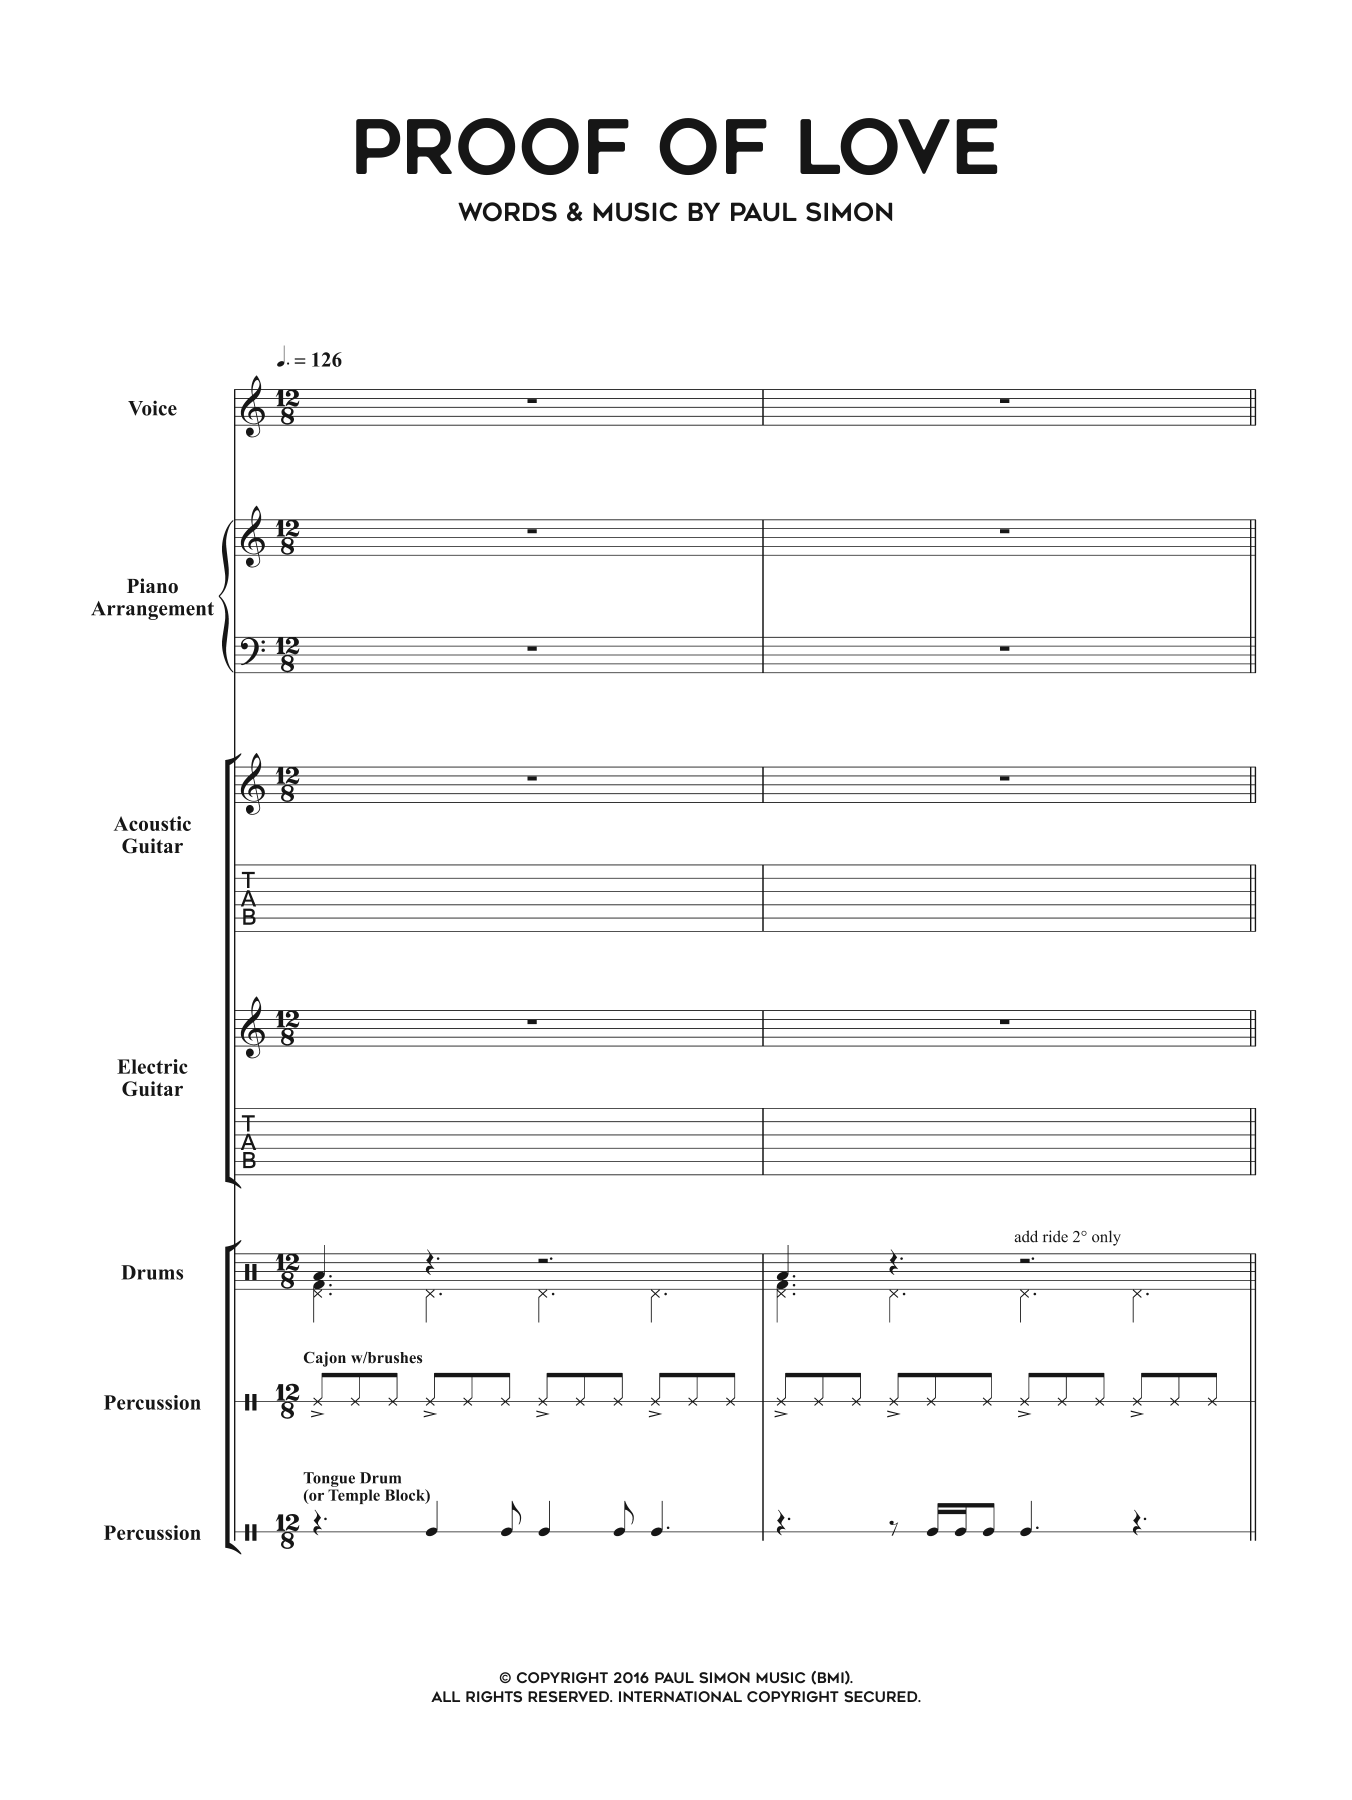 Paul Simon Proof Of Love sheet music notes and chords. Download Printable PDF.